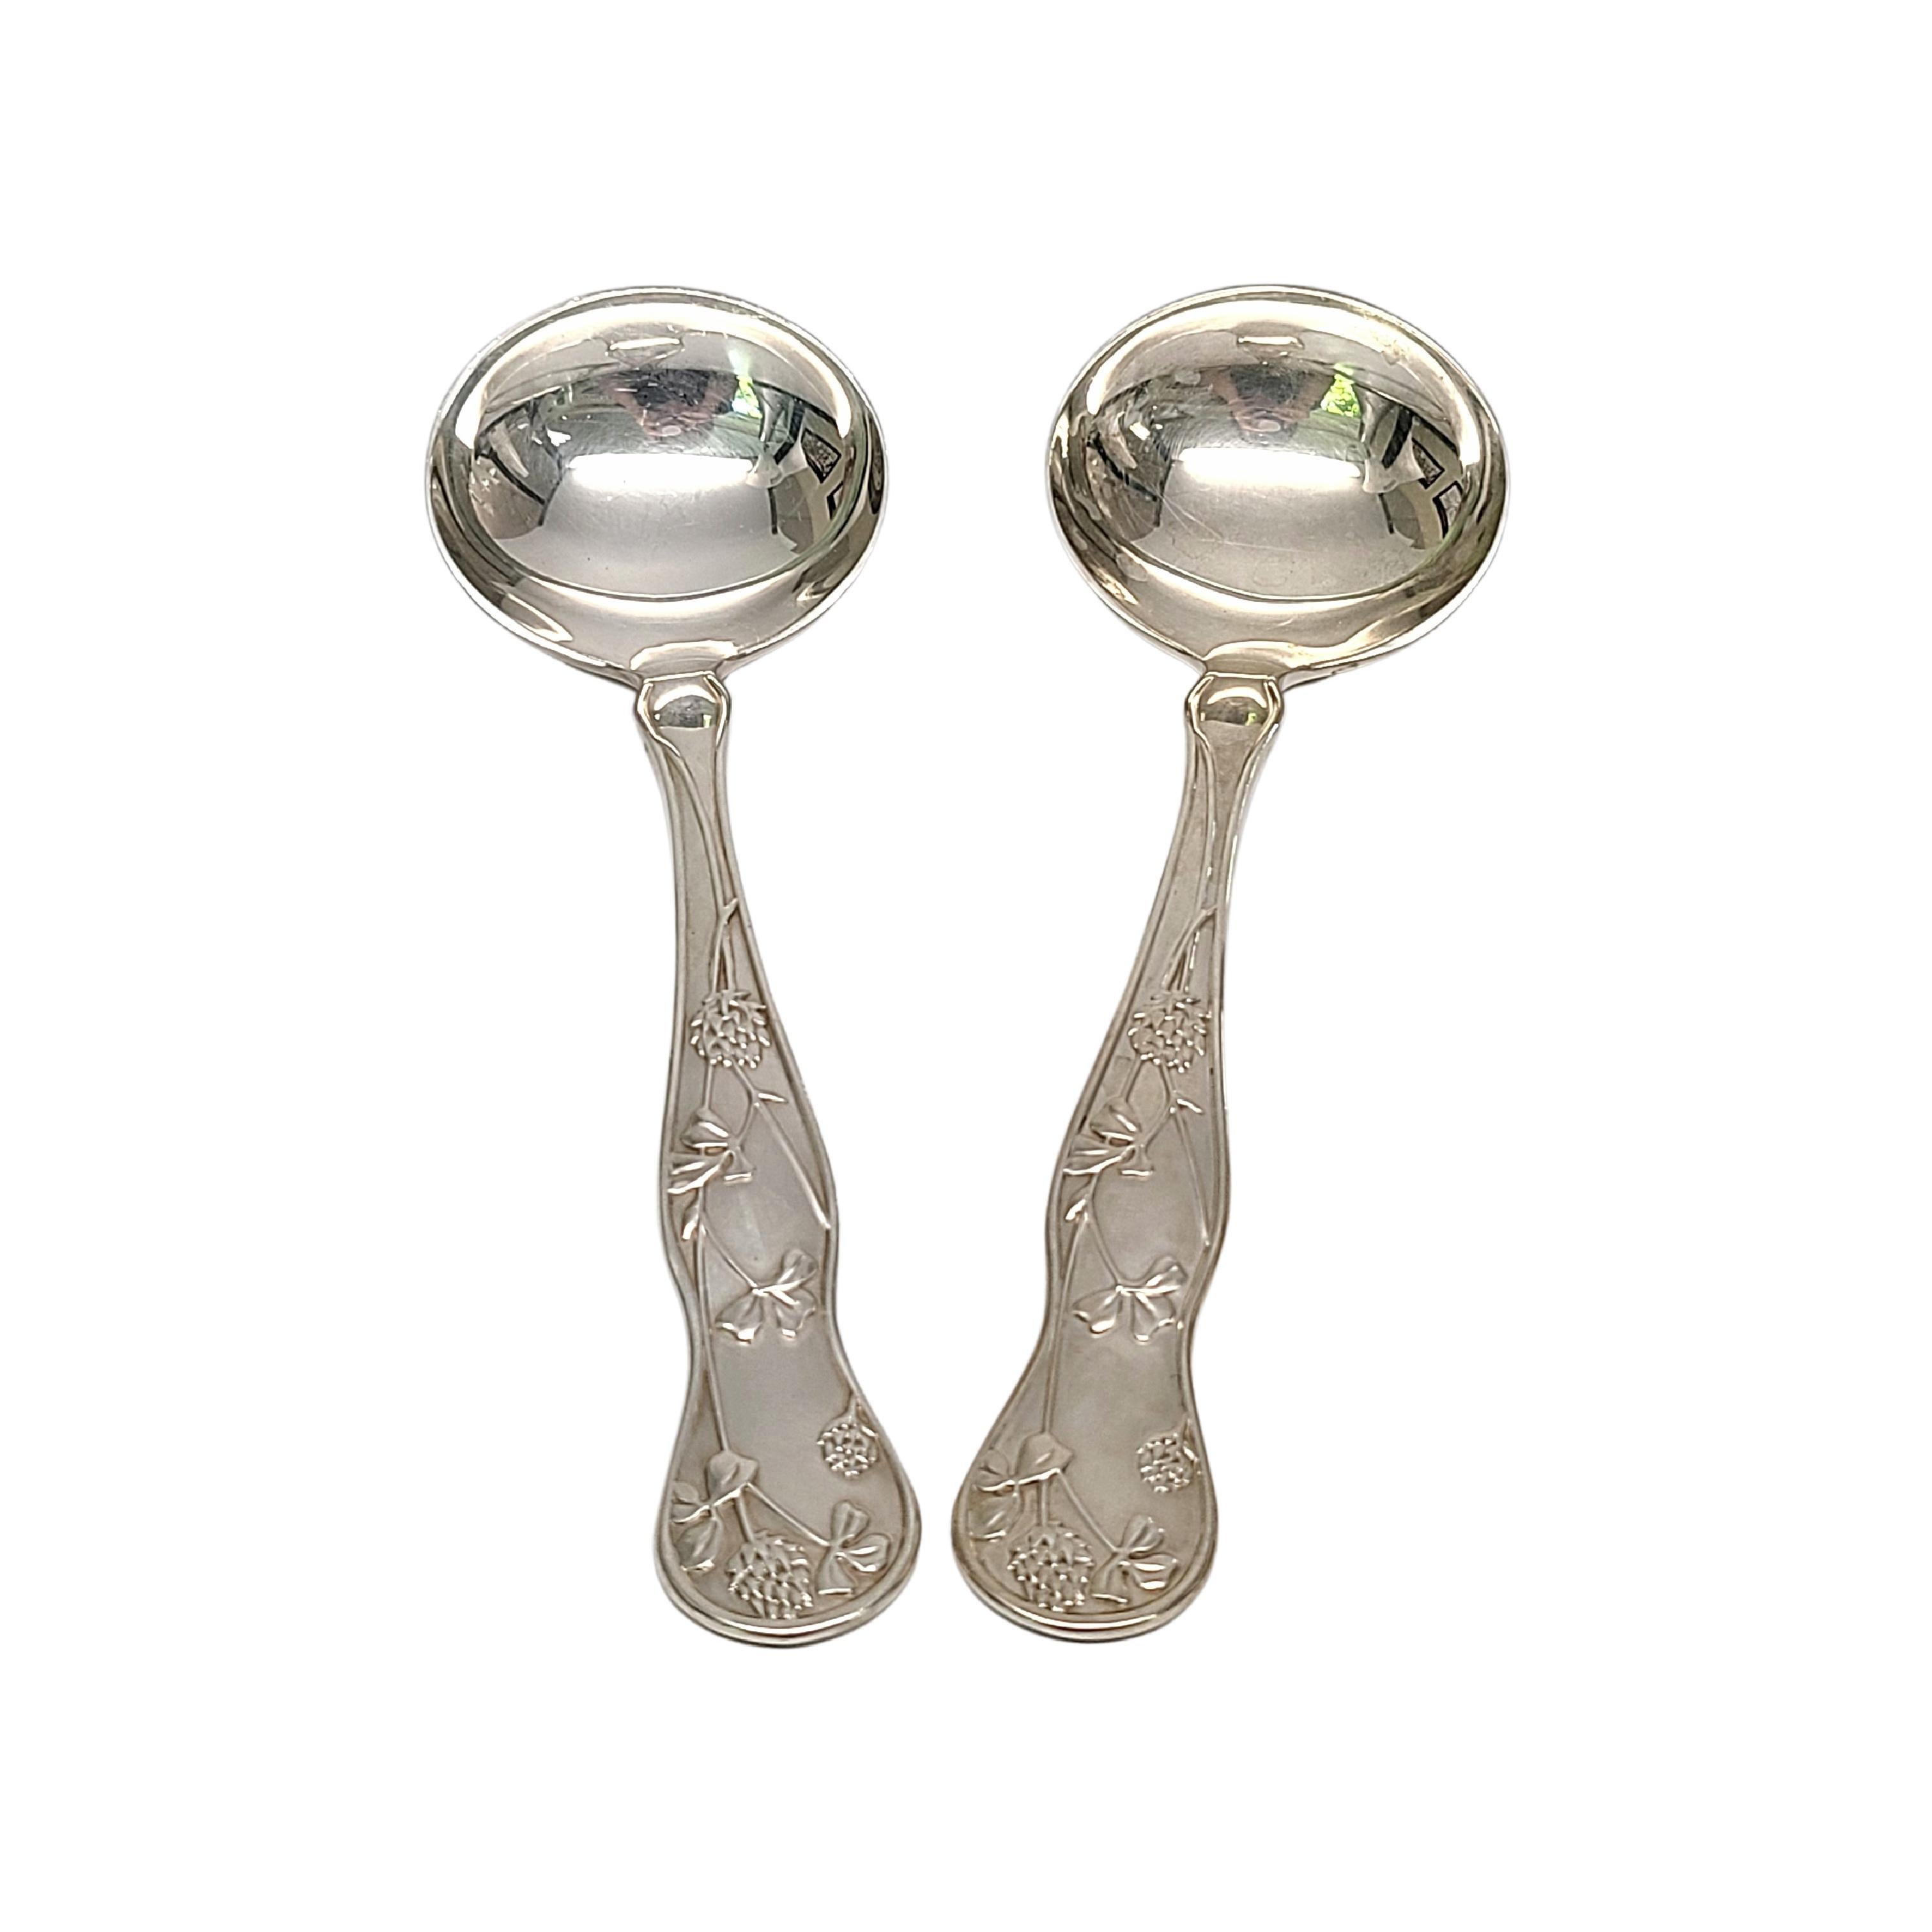 Set of 2 sterling silver gravy ladles by Tiffany & Co in the American Garden pattern.

No monogram

American Garden is a multi-motif pattern inspired by the extensive botanical beauty of the United States. Includes 2 Tiffany pouches.

Measures